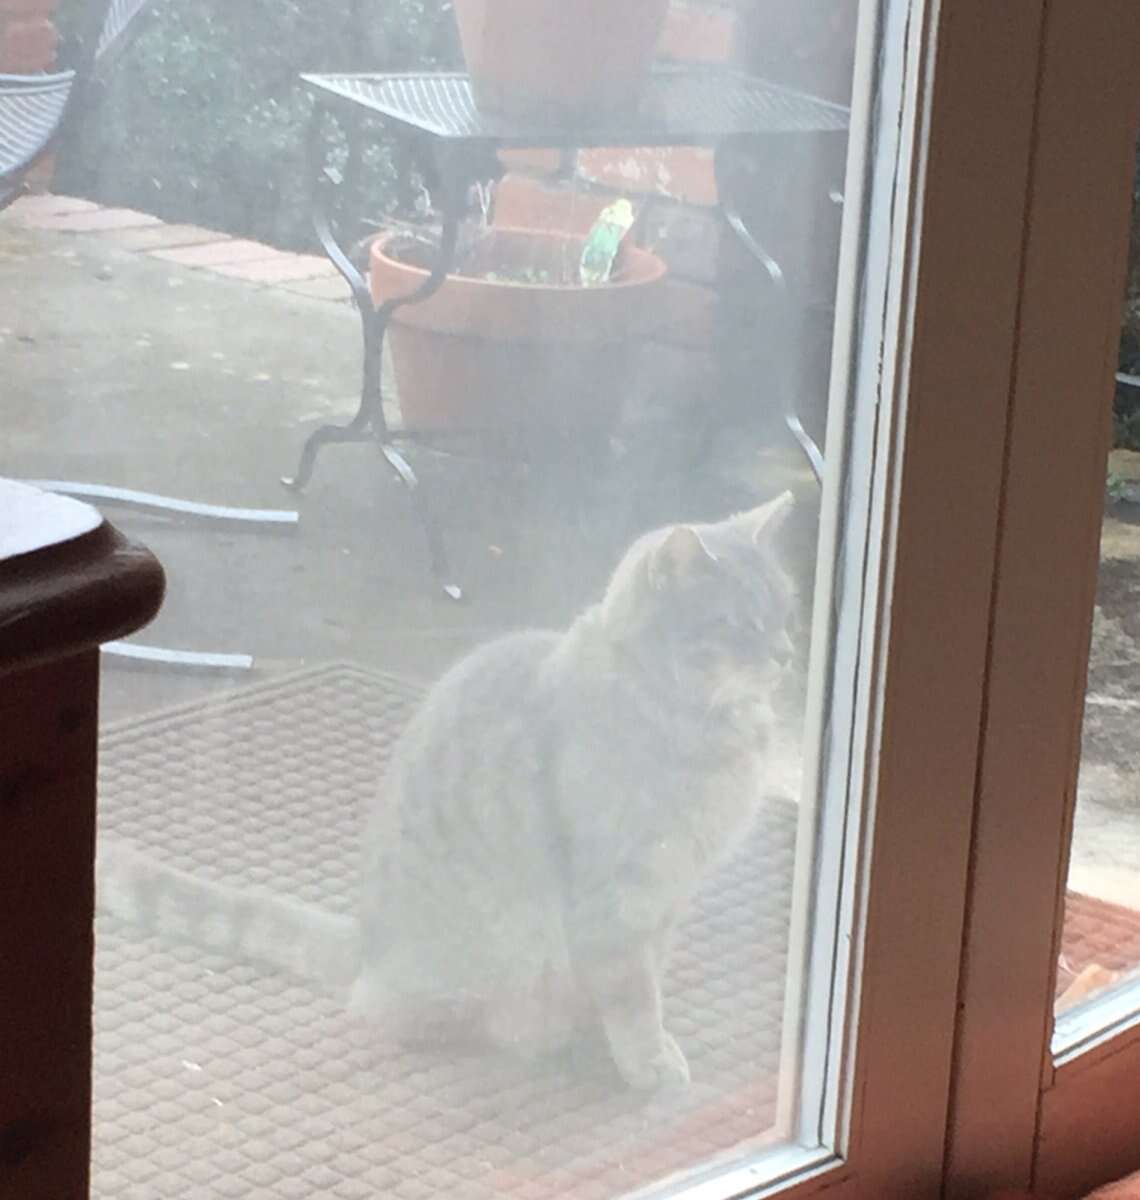 Cat waits at window of her dog friend